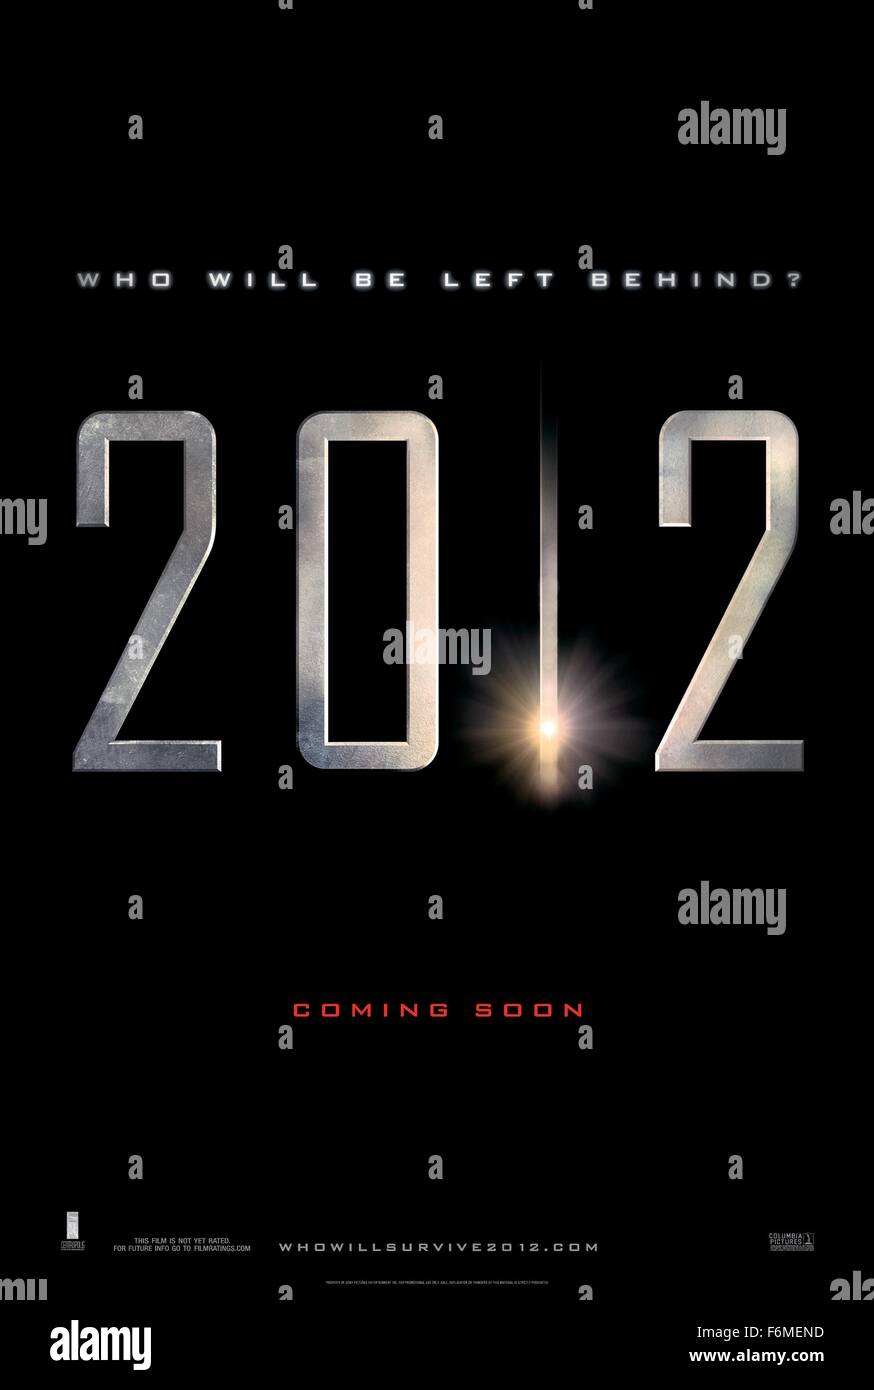 RELEASE DATE: November 13, 2009. MOVIE TITLE: 2012. STUDIO: Columbia Pictures. PLOT: When the geologist Dr. Adrian Helmsley and his team discover that the core of Earth is heating due to solar radiation, he advises the North American President about his findings. The American Govern collects money from the worldwide leaders to build arks to save them with necessary people to rebuild civilization. Meanwhile, the unsuccessful writer Jackson Curtis discloses that the world is near to end and tries to save his son and his daughter from the tragic end. PICTURED: . Stock Photo